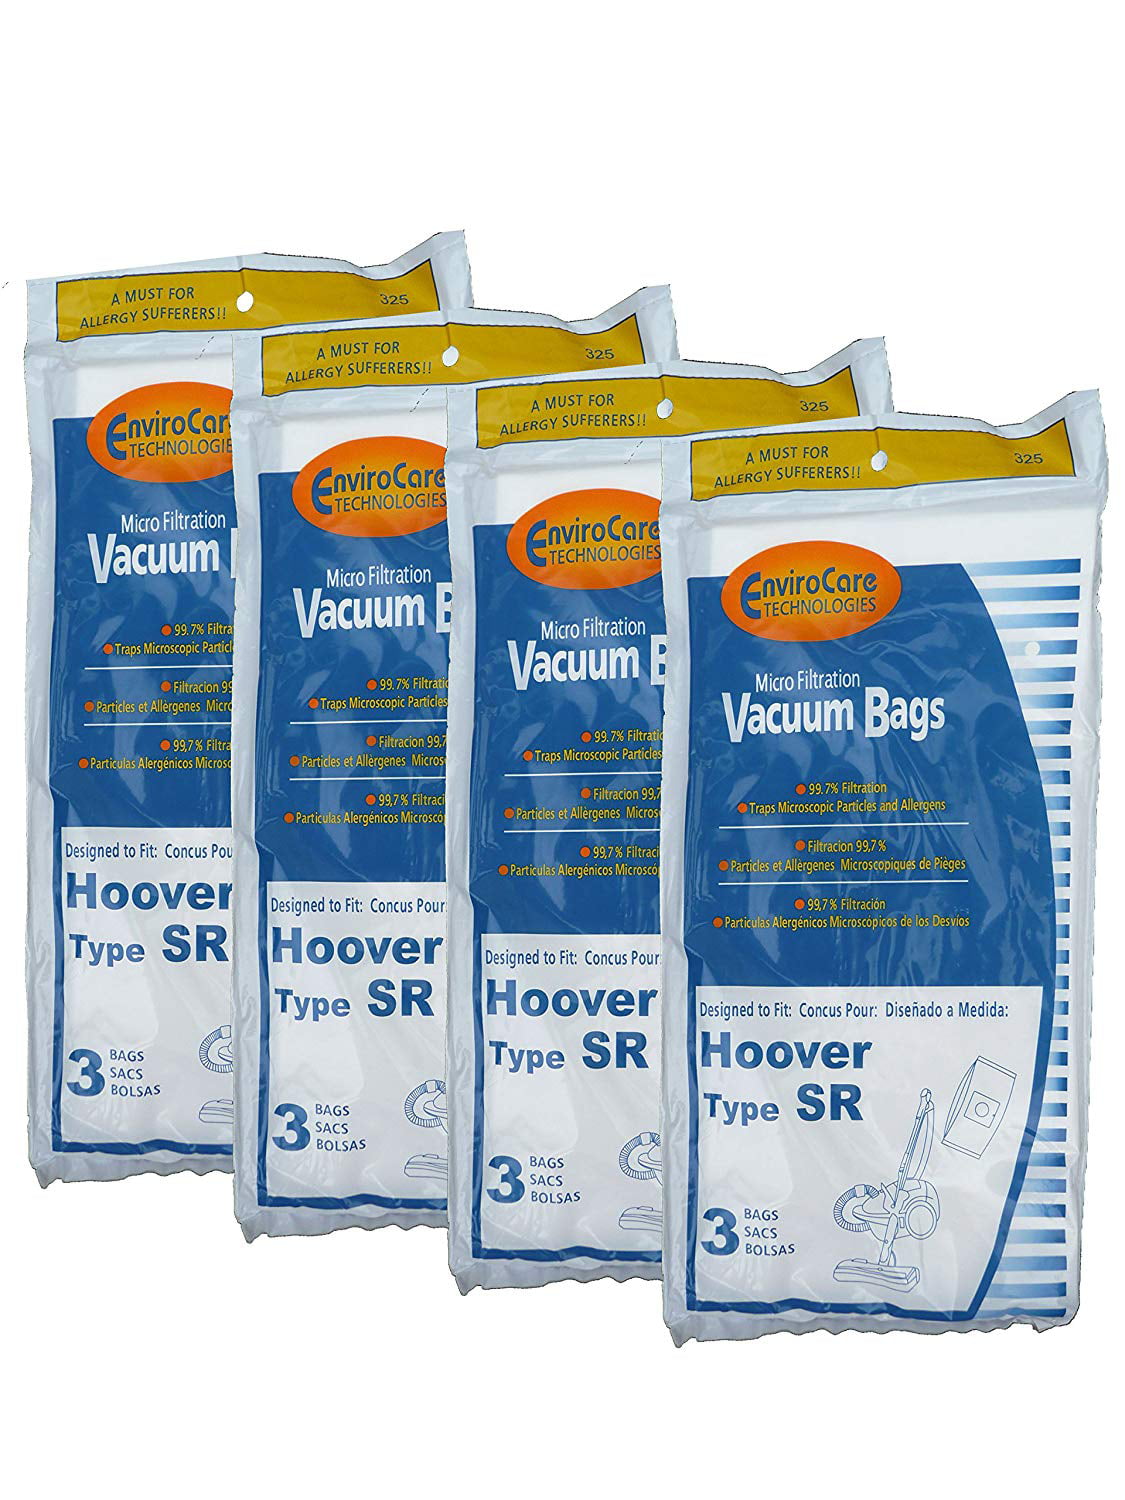 HO-101 12 Hoover Duros Type SR Vacuum Bags with MicroFiltration Vacuum Cleaners 